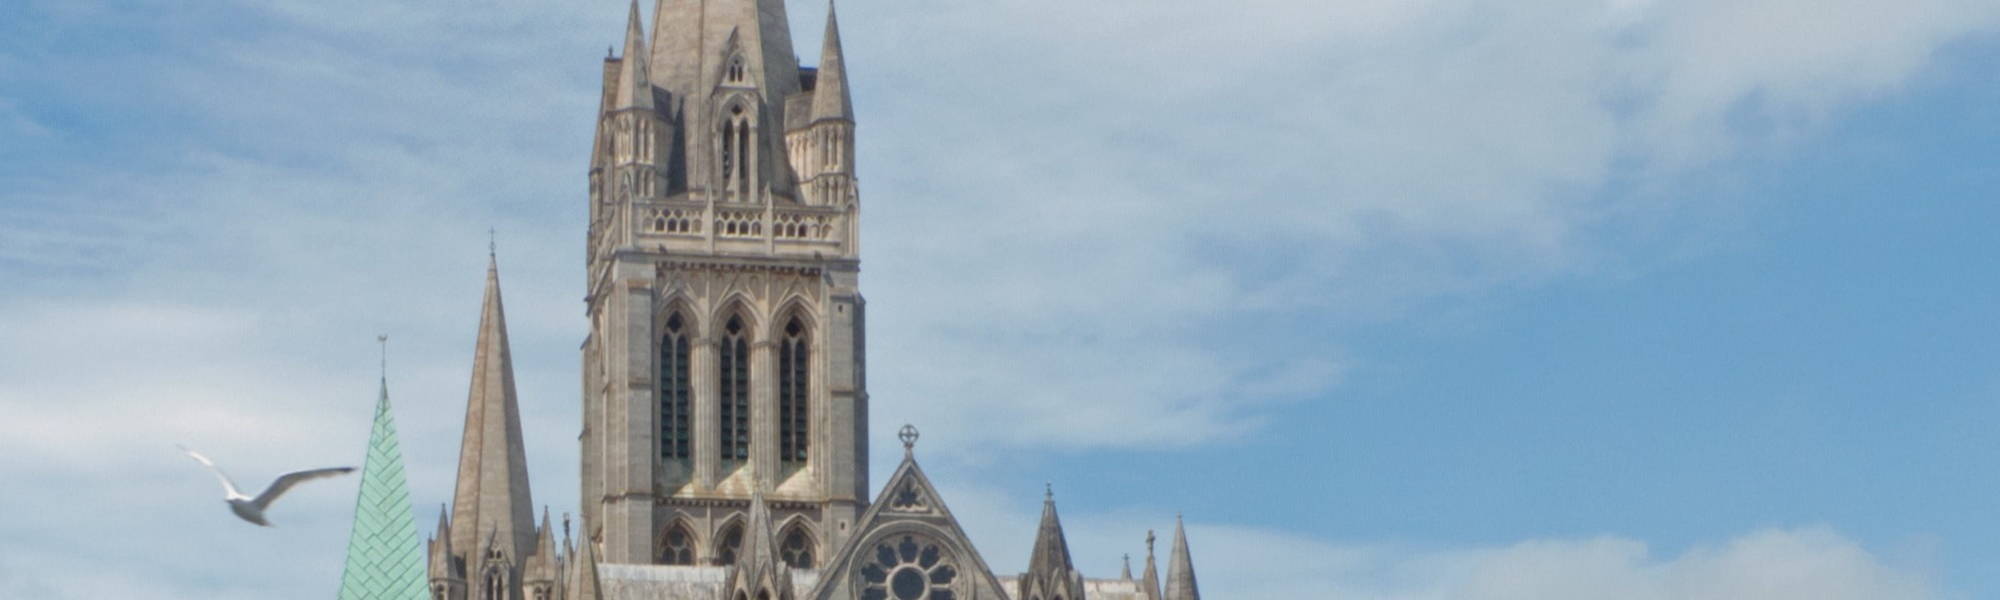 Truro Cathedral, seen from the river